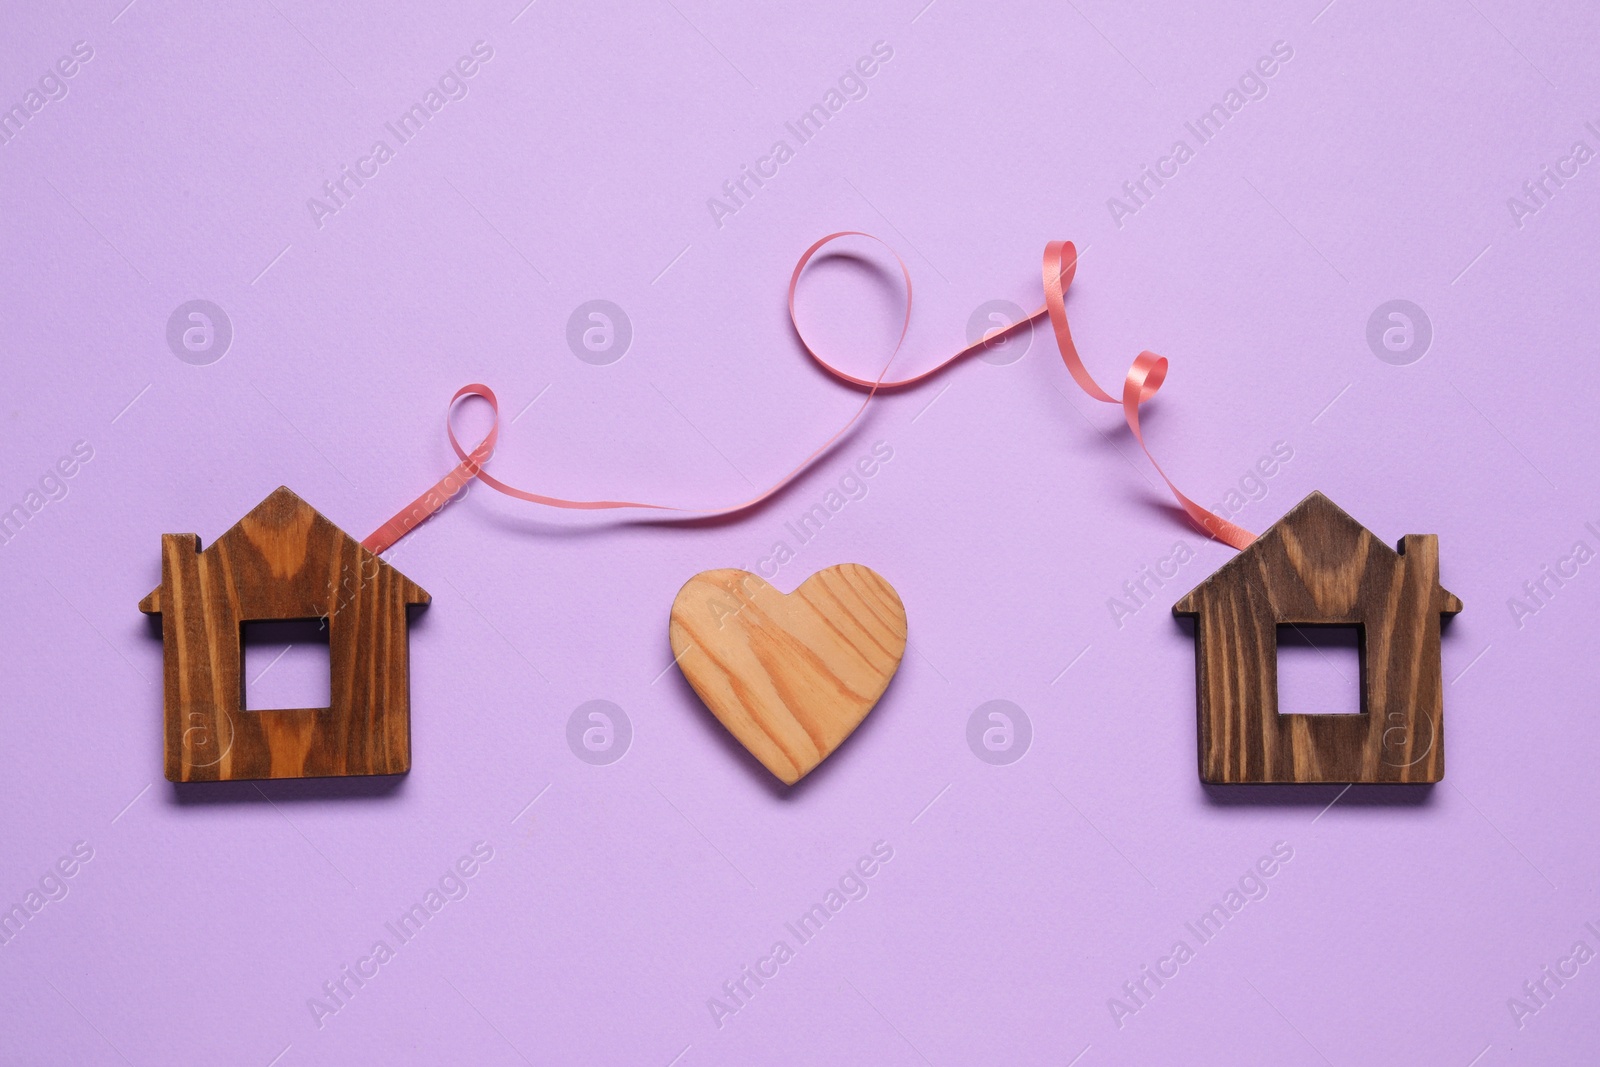 Photo of Ribbon and decorative heart between two wooden house models on violet background symbolizing connection in long-distance relationship, flat lay